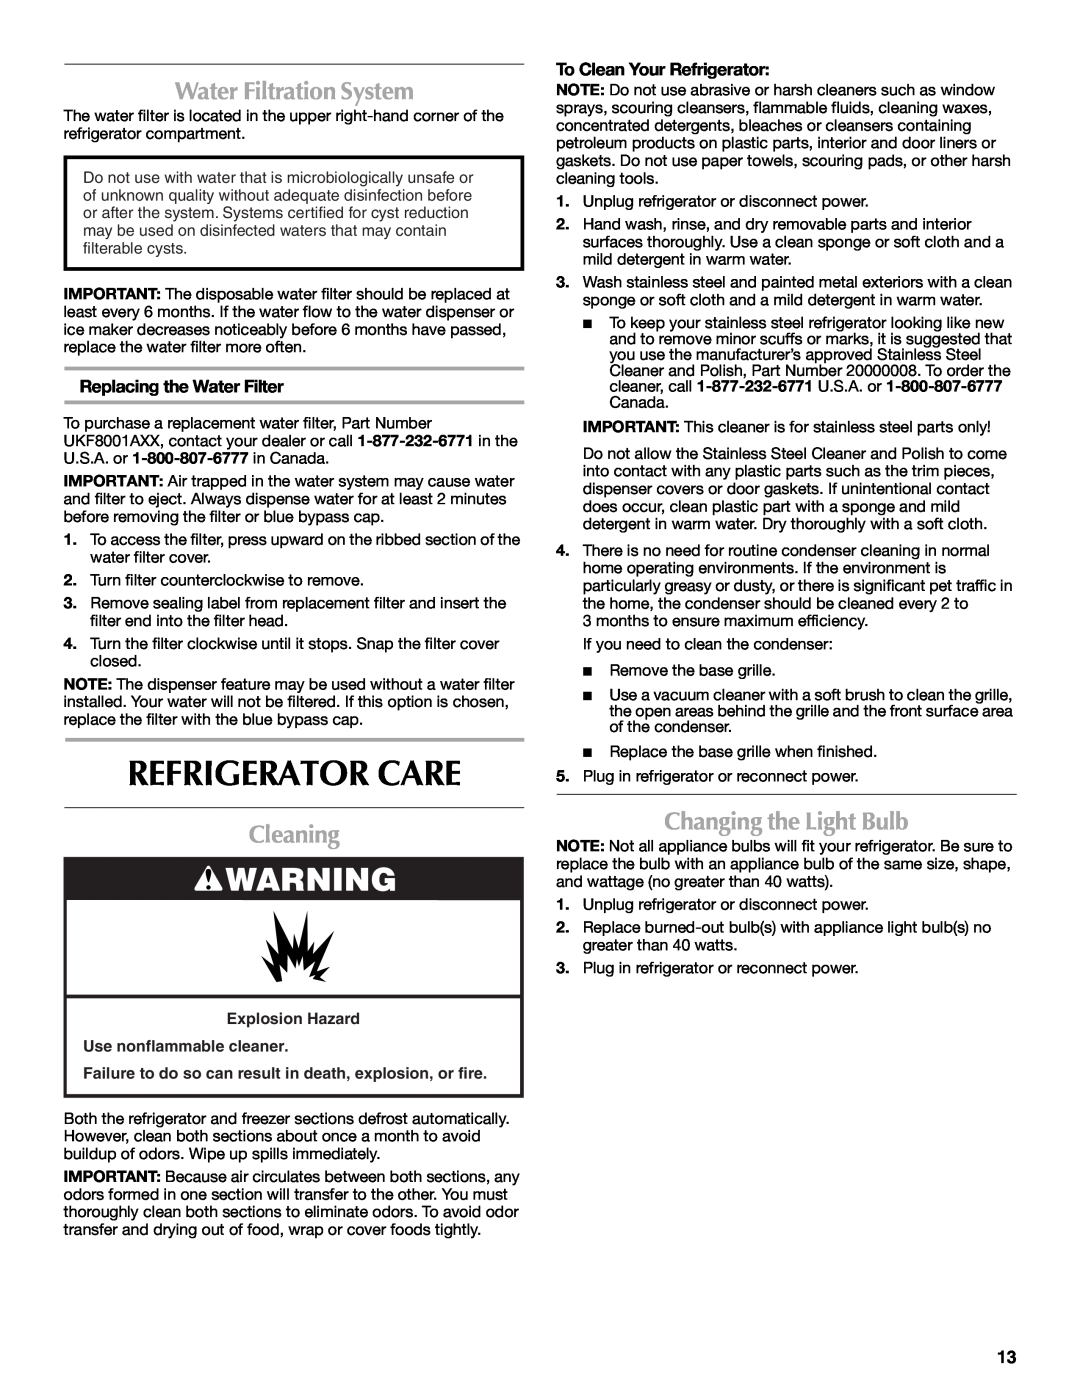 Maytag MFT2771WEM installation instructions Refrigerator Care, Water Filtration System, Cleaning, Changing the Light Bulb 